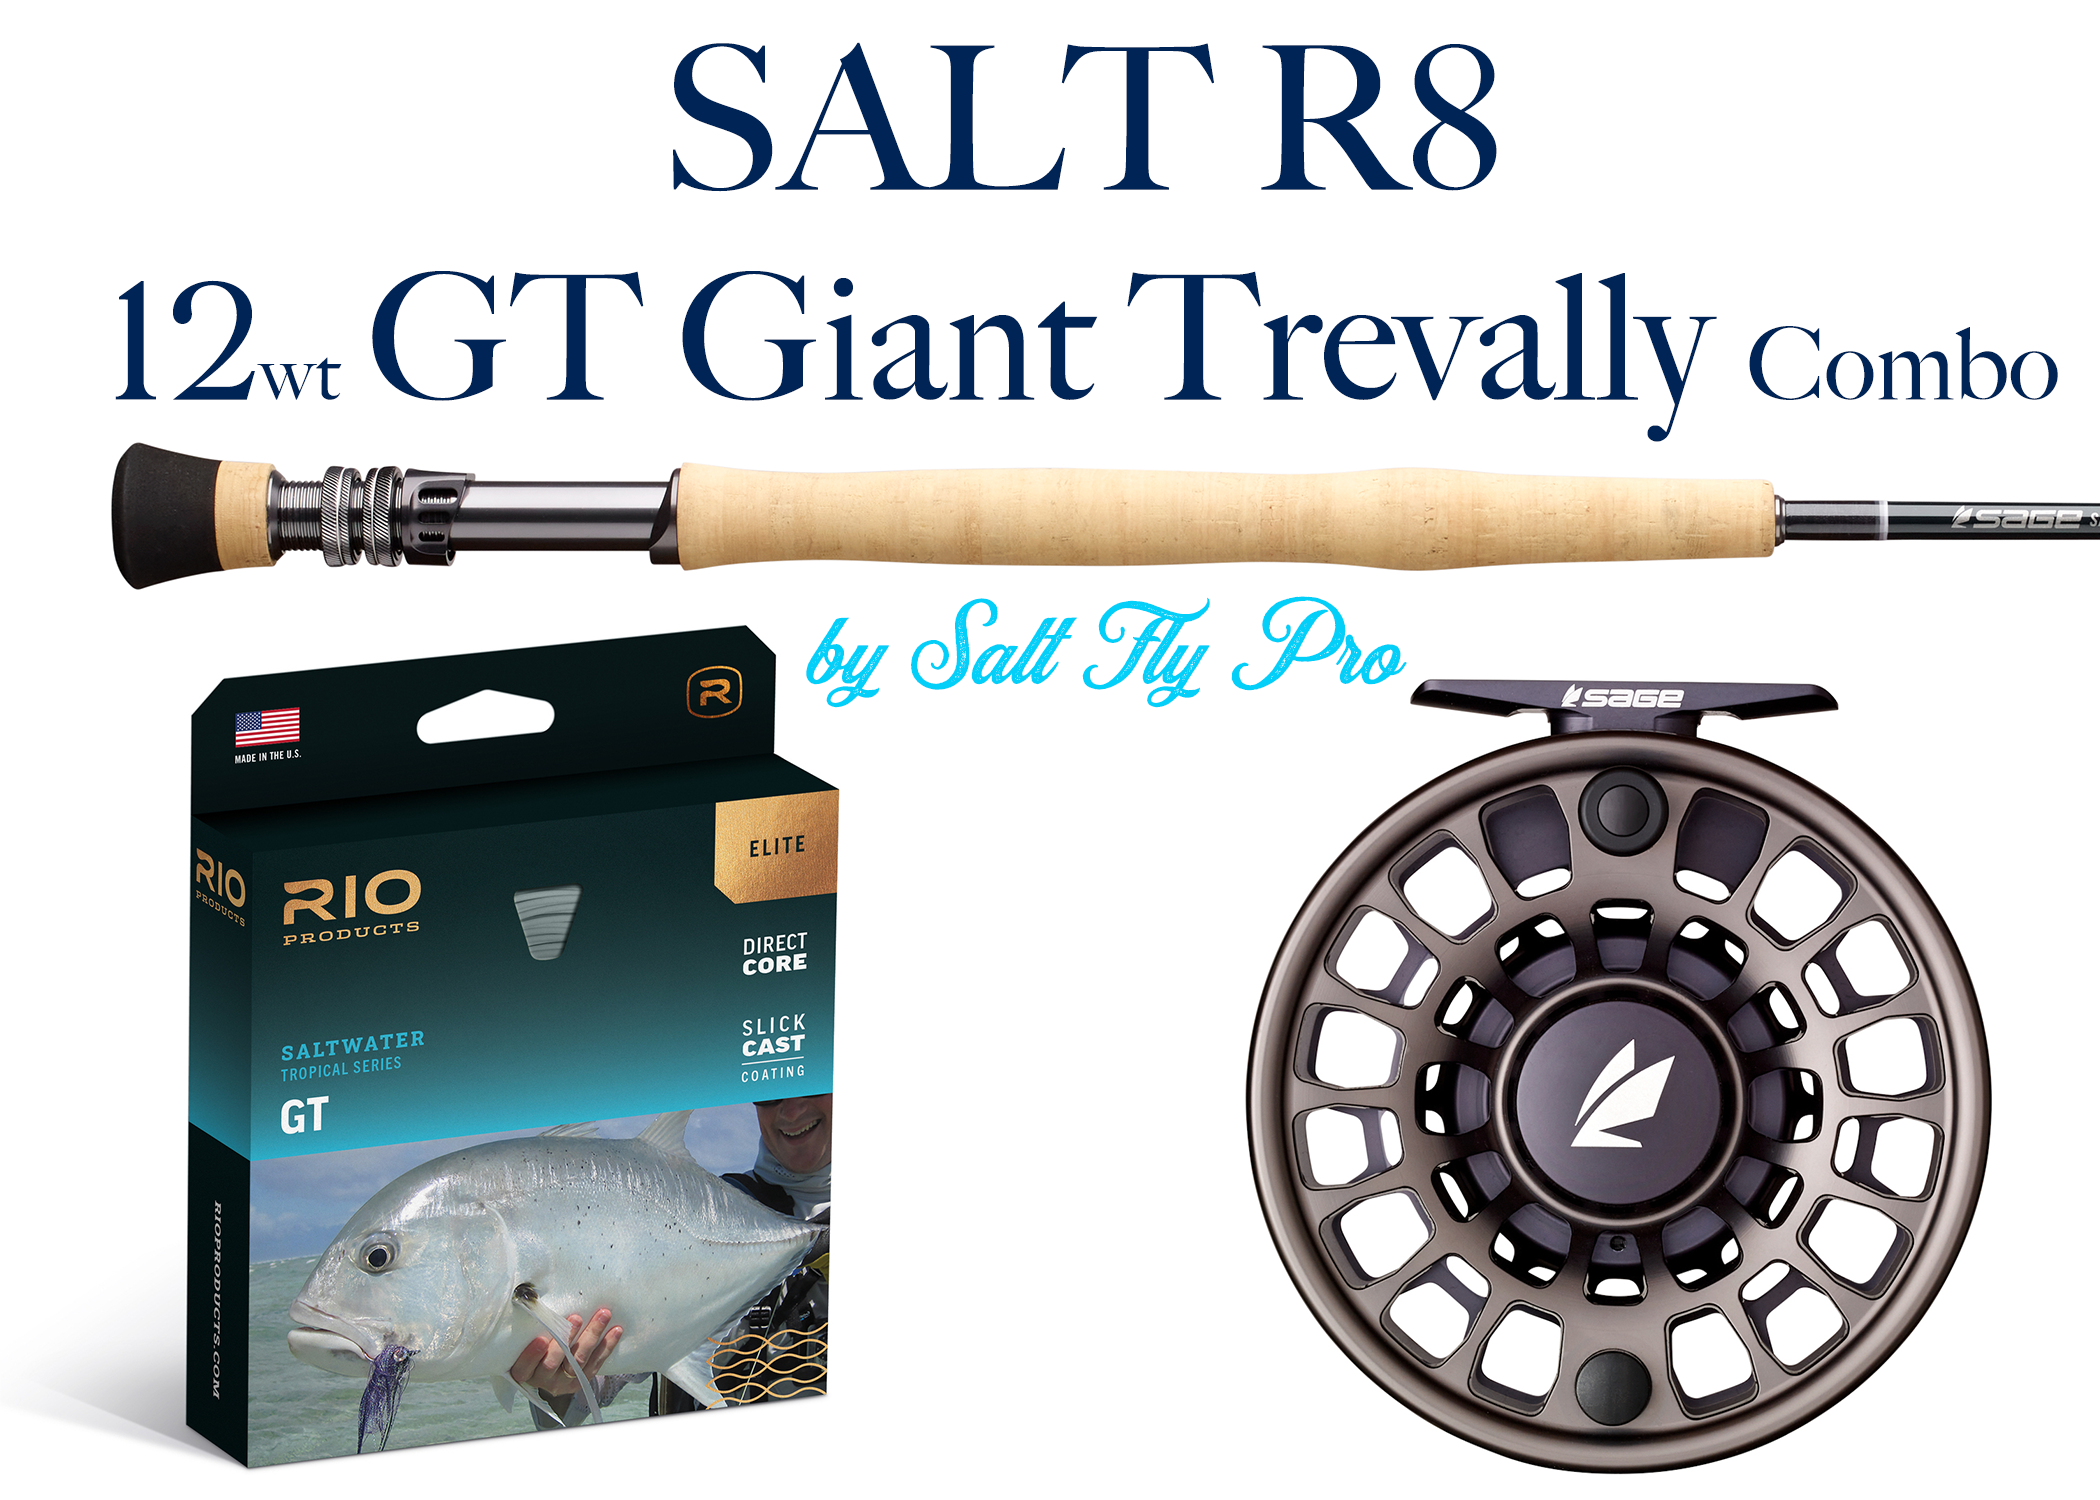 Sage SALT R8 11wt ROOSTERFISH Fly Rod Combo Outfit - NEW!